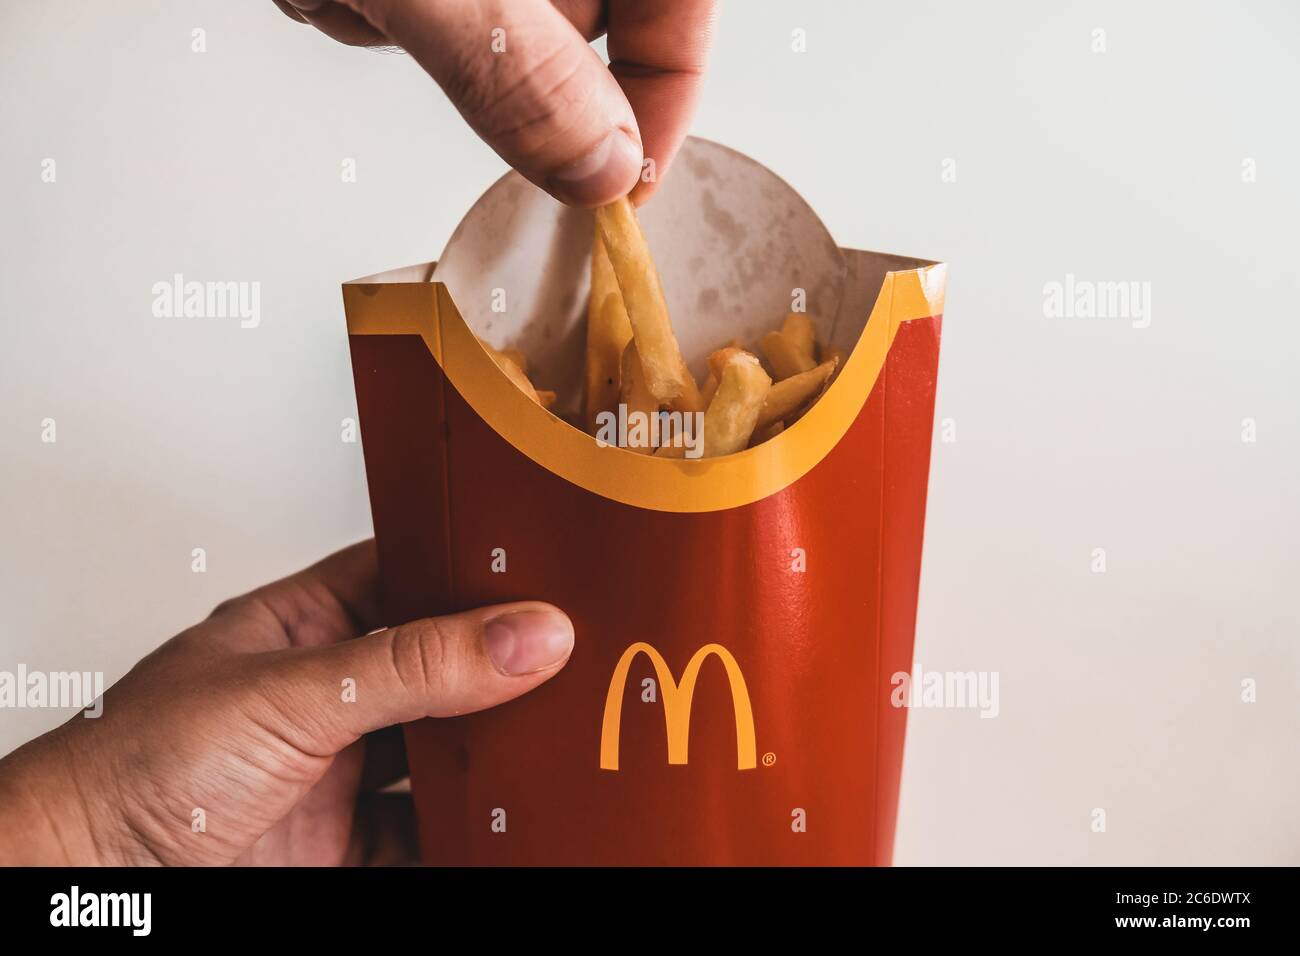 Lviv / Ukraine - April 2020: Close up view of hungry man's hand taking a piece of french fries from Mcdonalds bag. Ordering unhealthy takeaway food Stock Photo